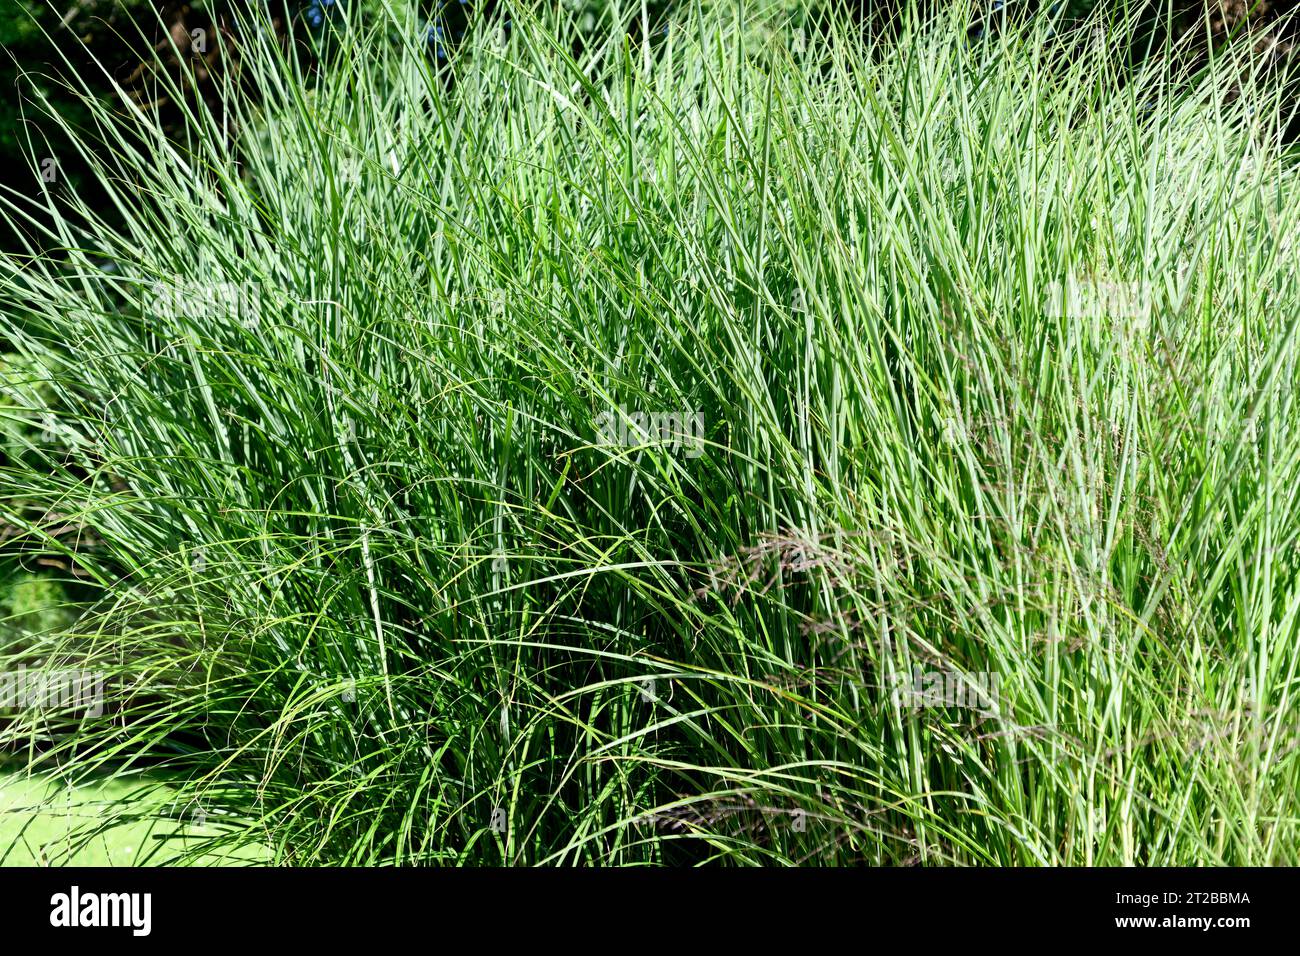 Purple moor-grass (Molinia caerulea) is a perennial herb native of Europe, north Africa and west Asia. This photo was taken in Asturias, Spain. Stock Photo